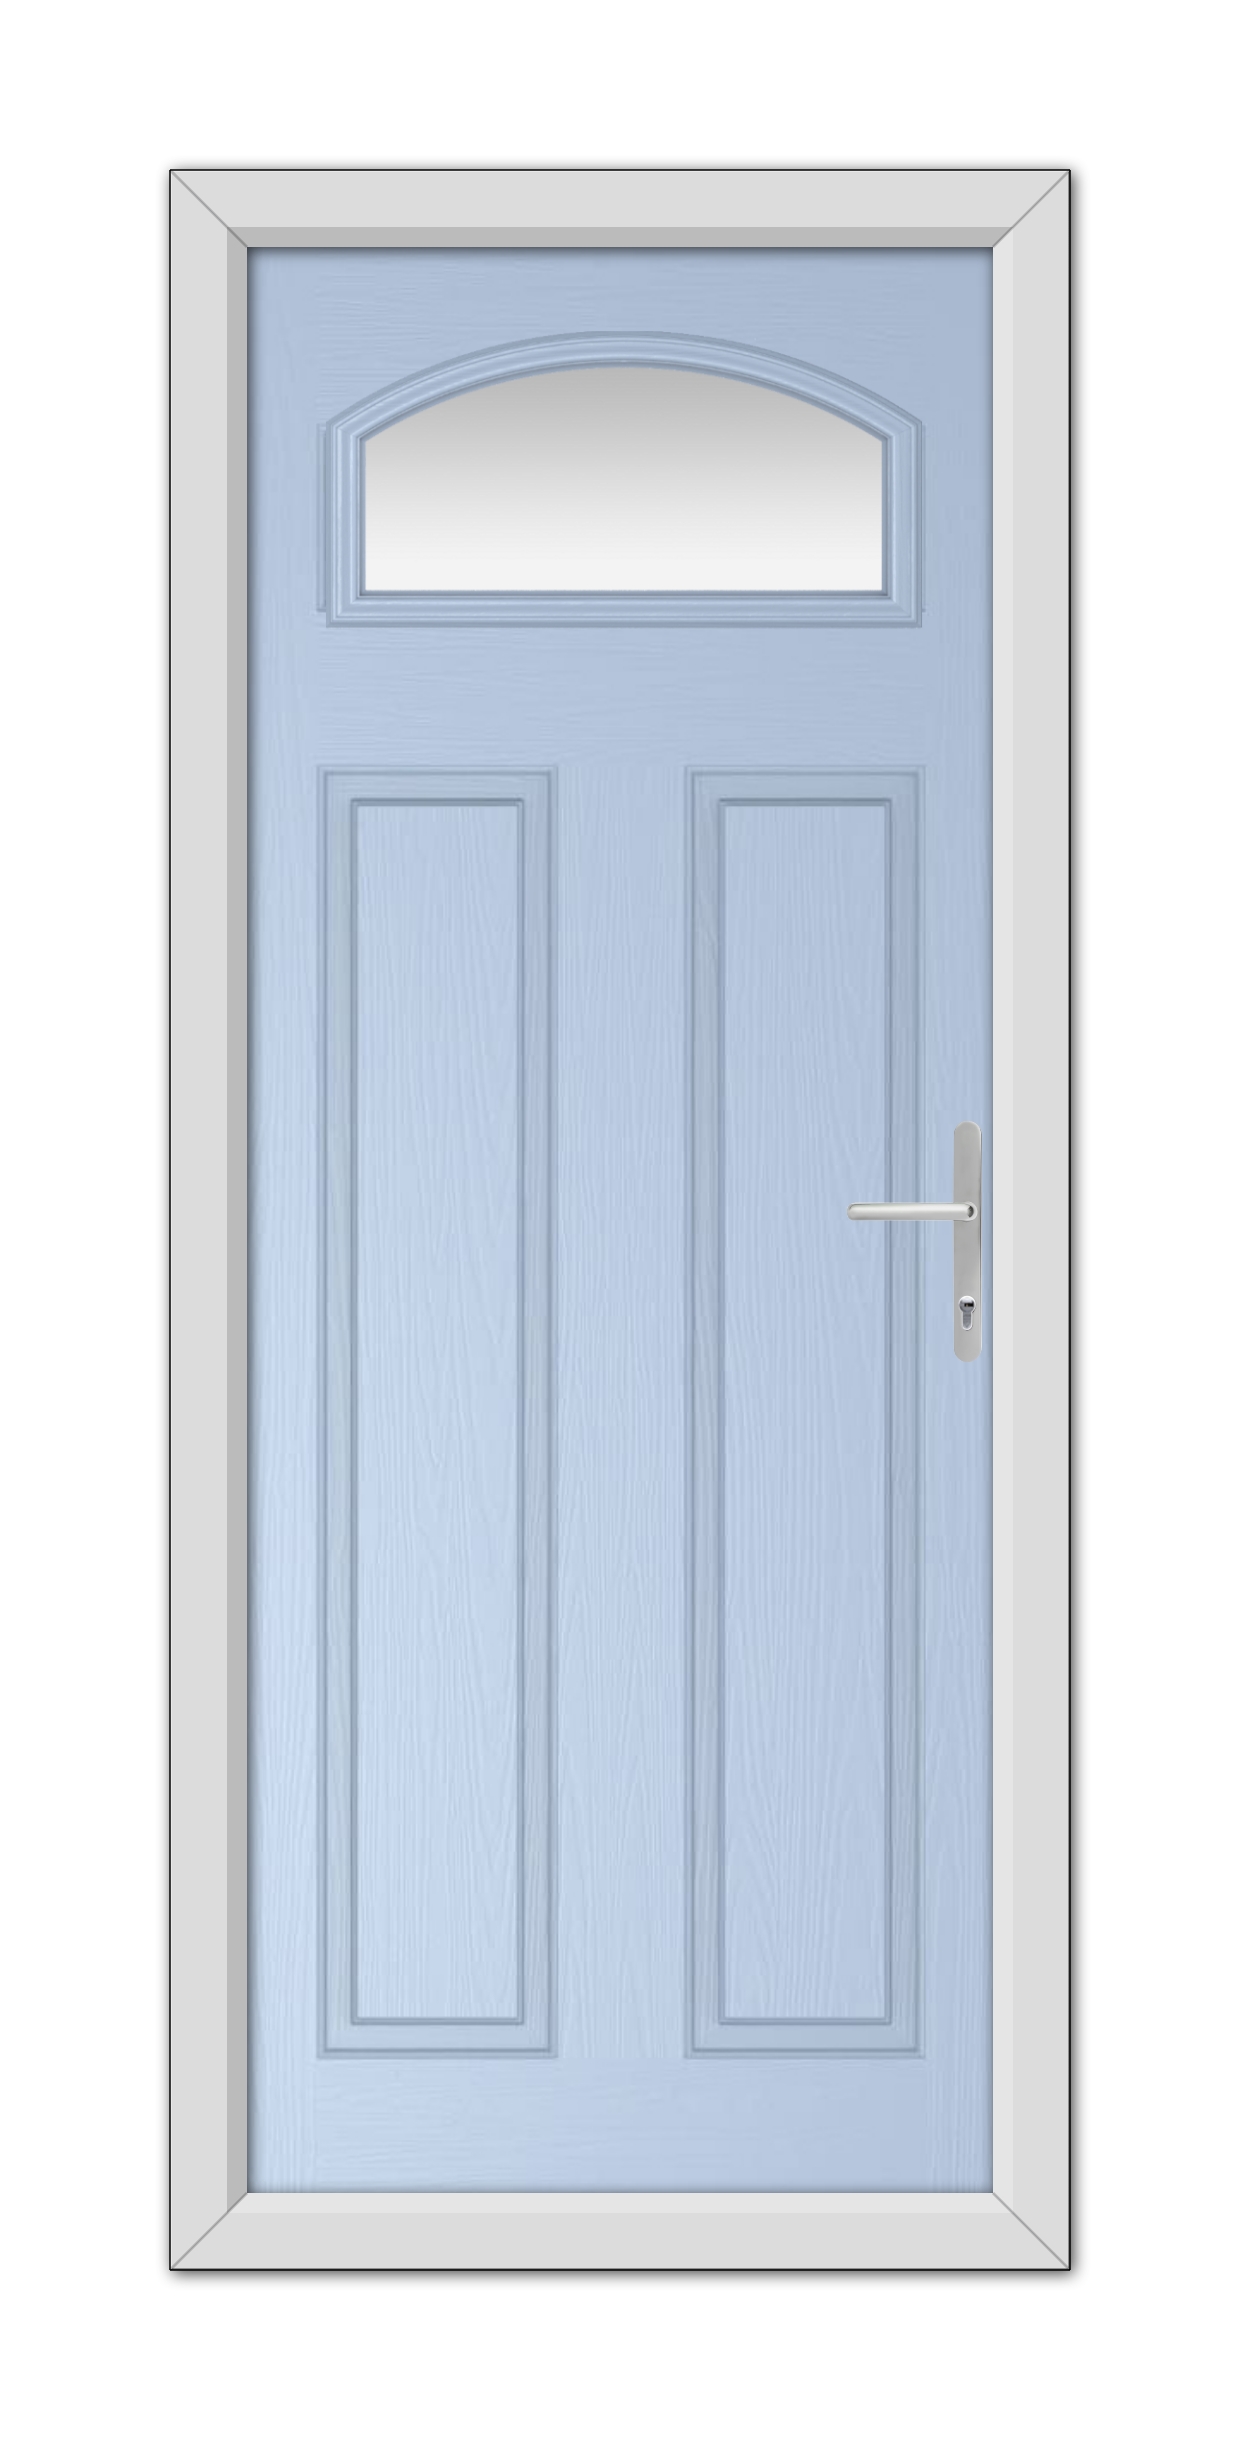 A Duck Egg Blue Harlington Composite Door with a semi-circular window at the top and a silver handle, set within a white frame.